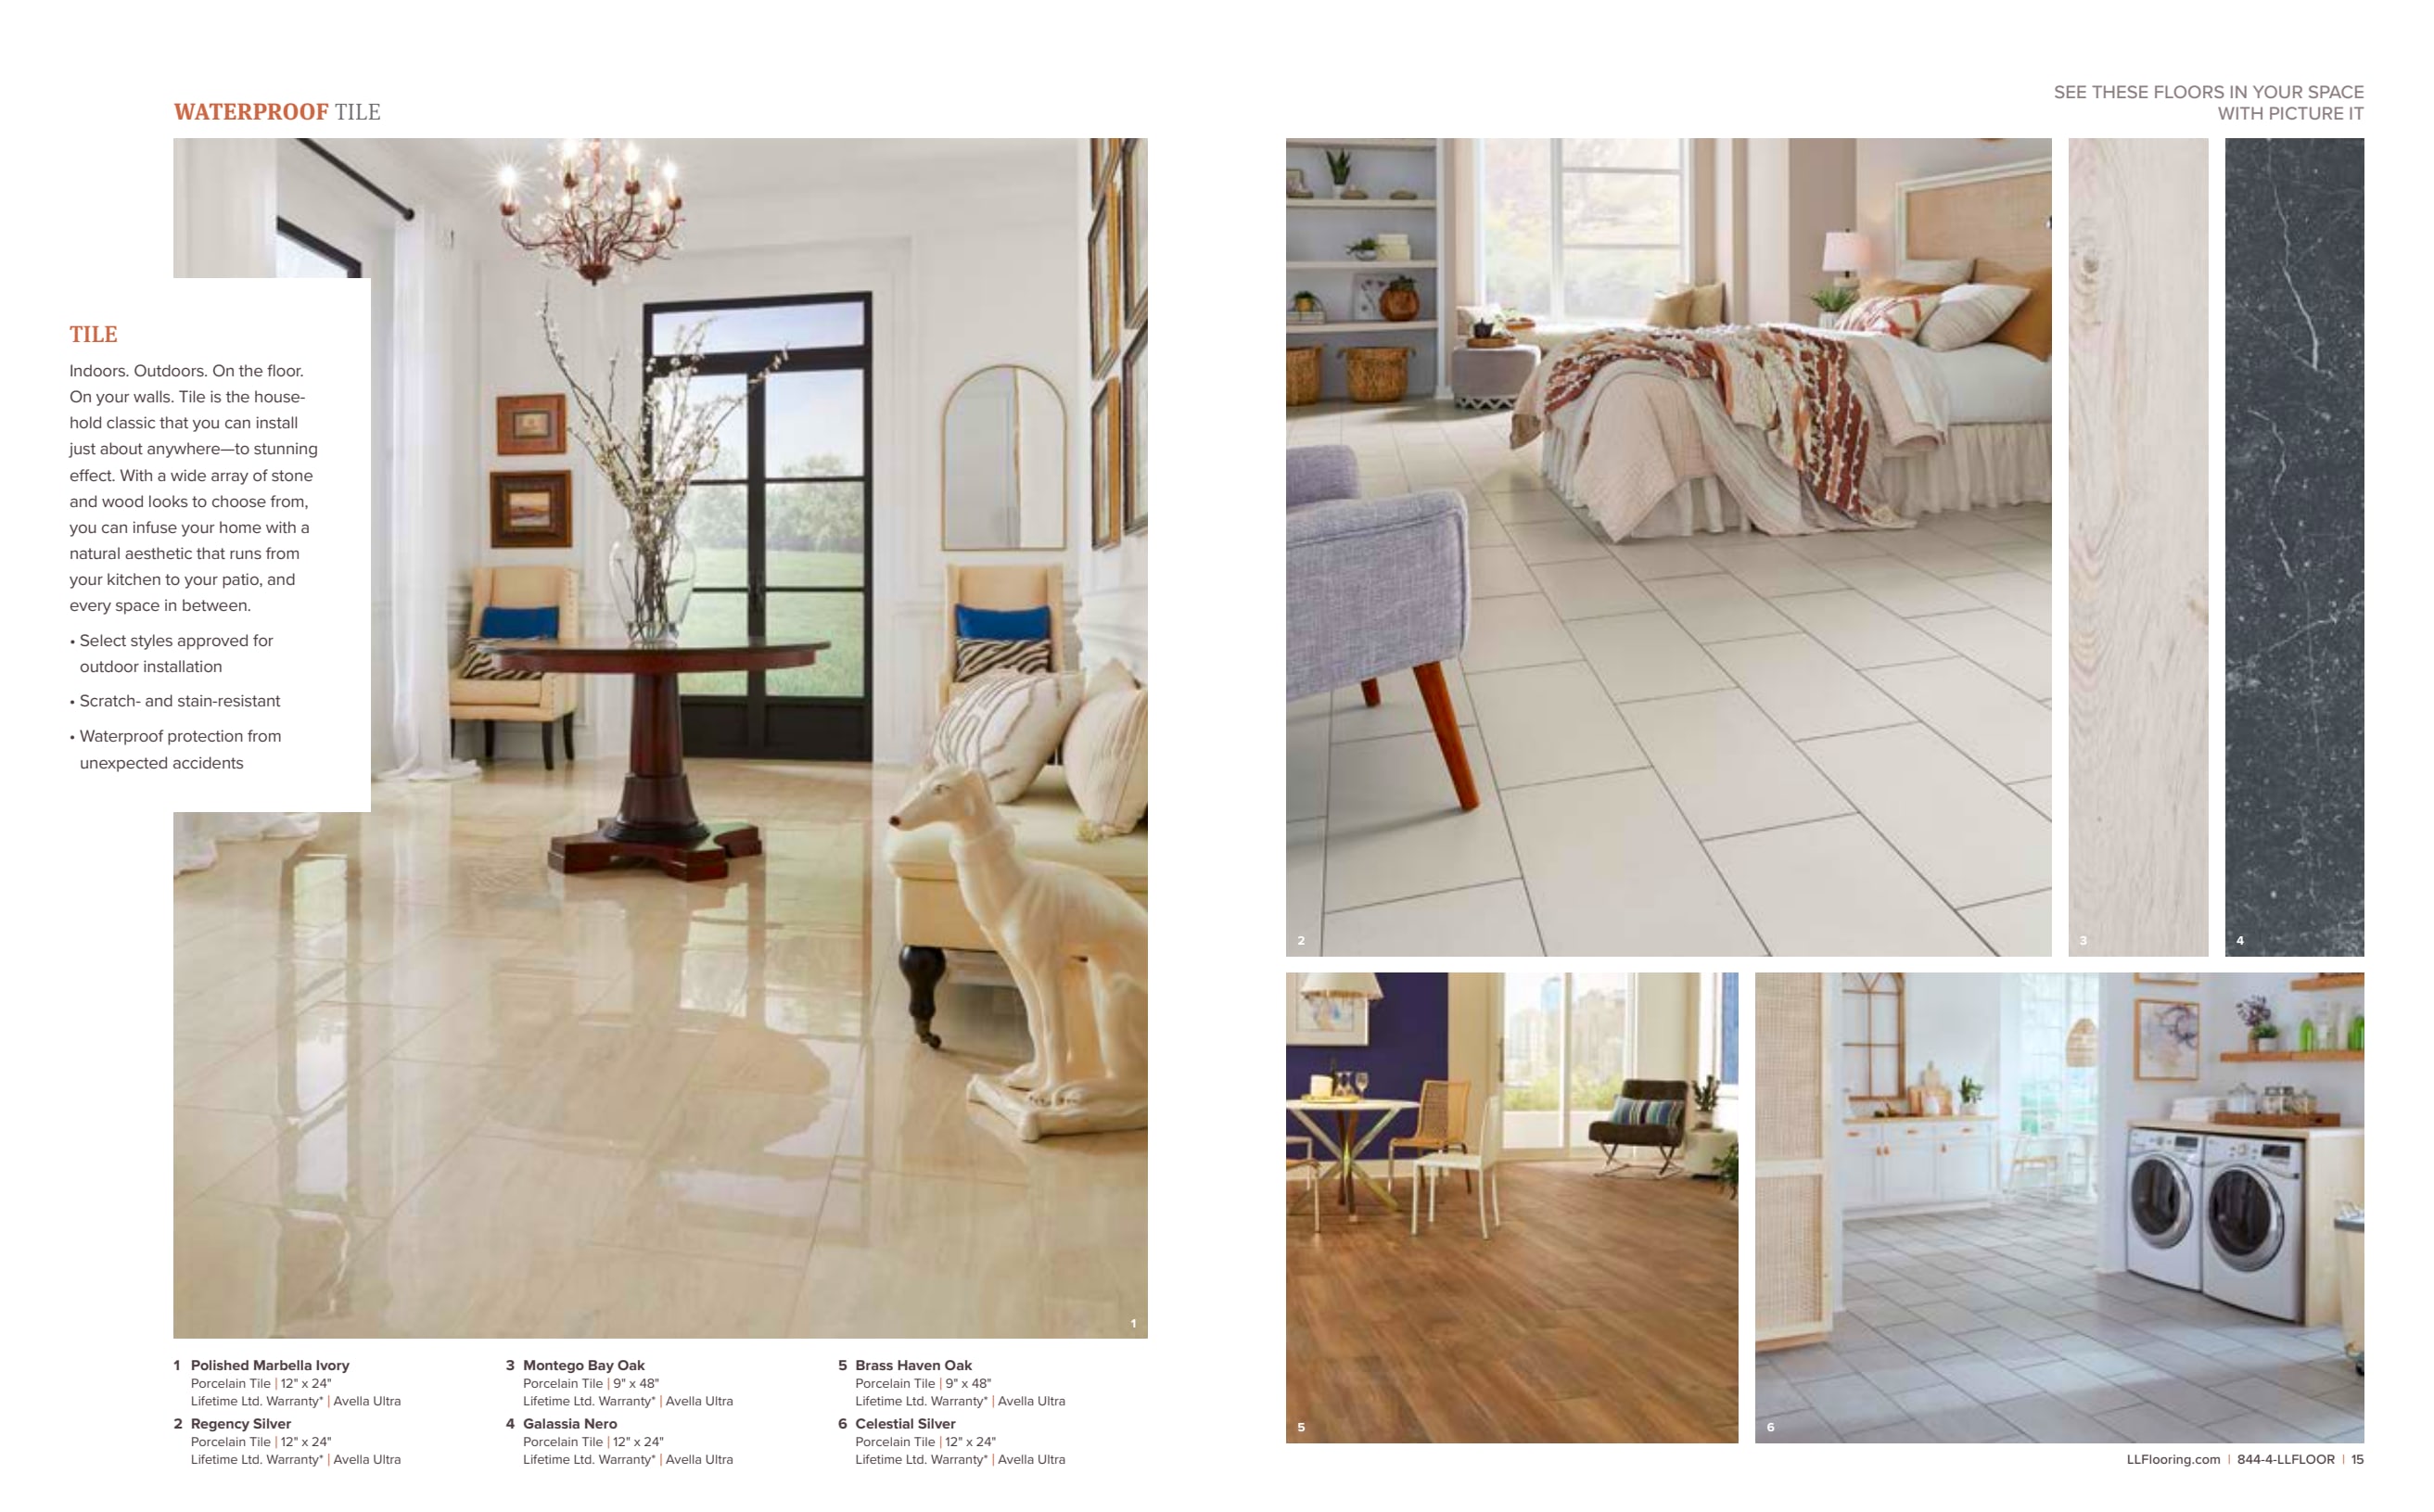 Images of rooms with tile flooring